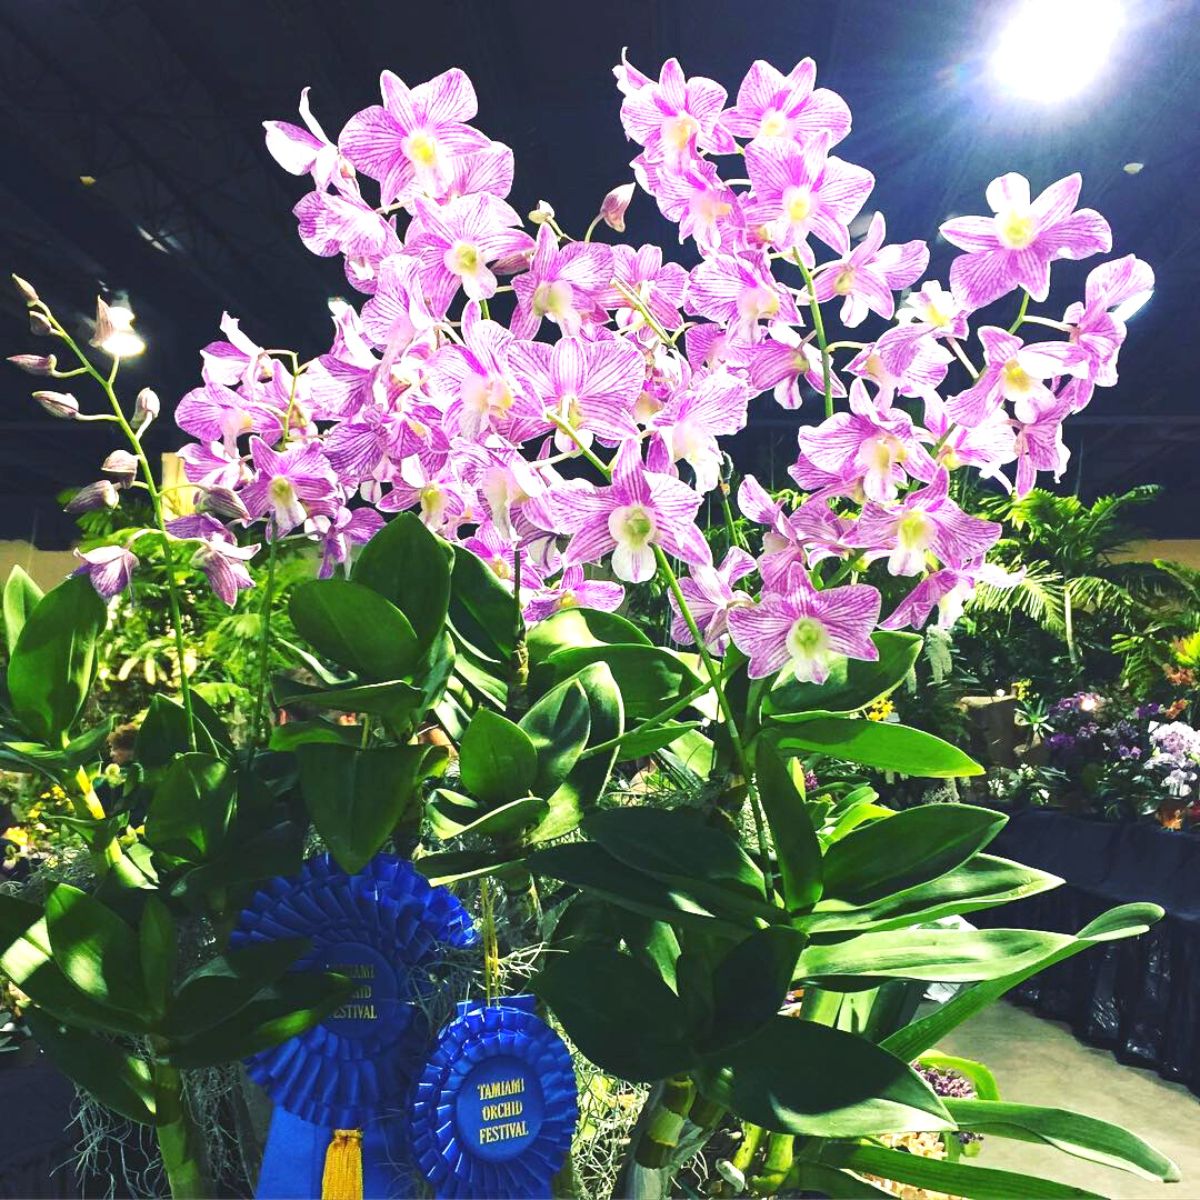 Prized orchid at the Tamiami Orchid Festival